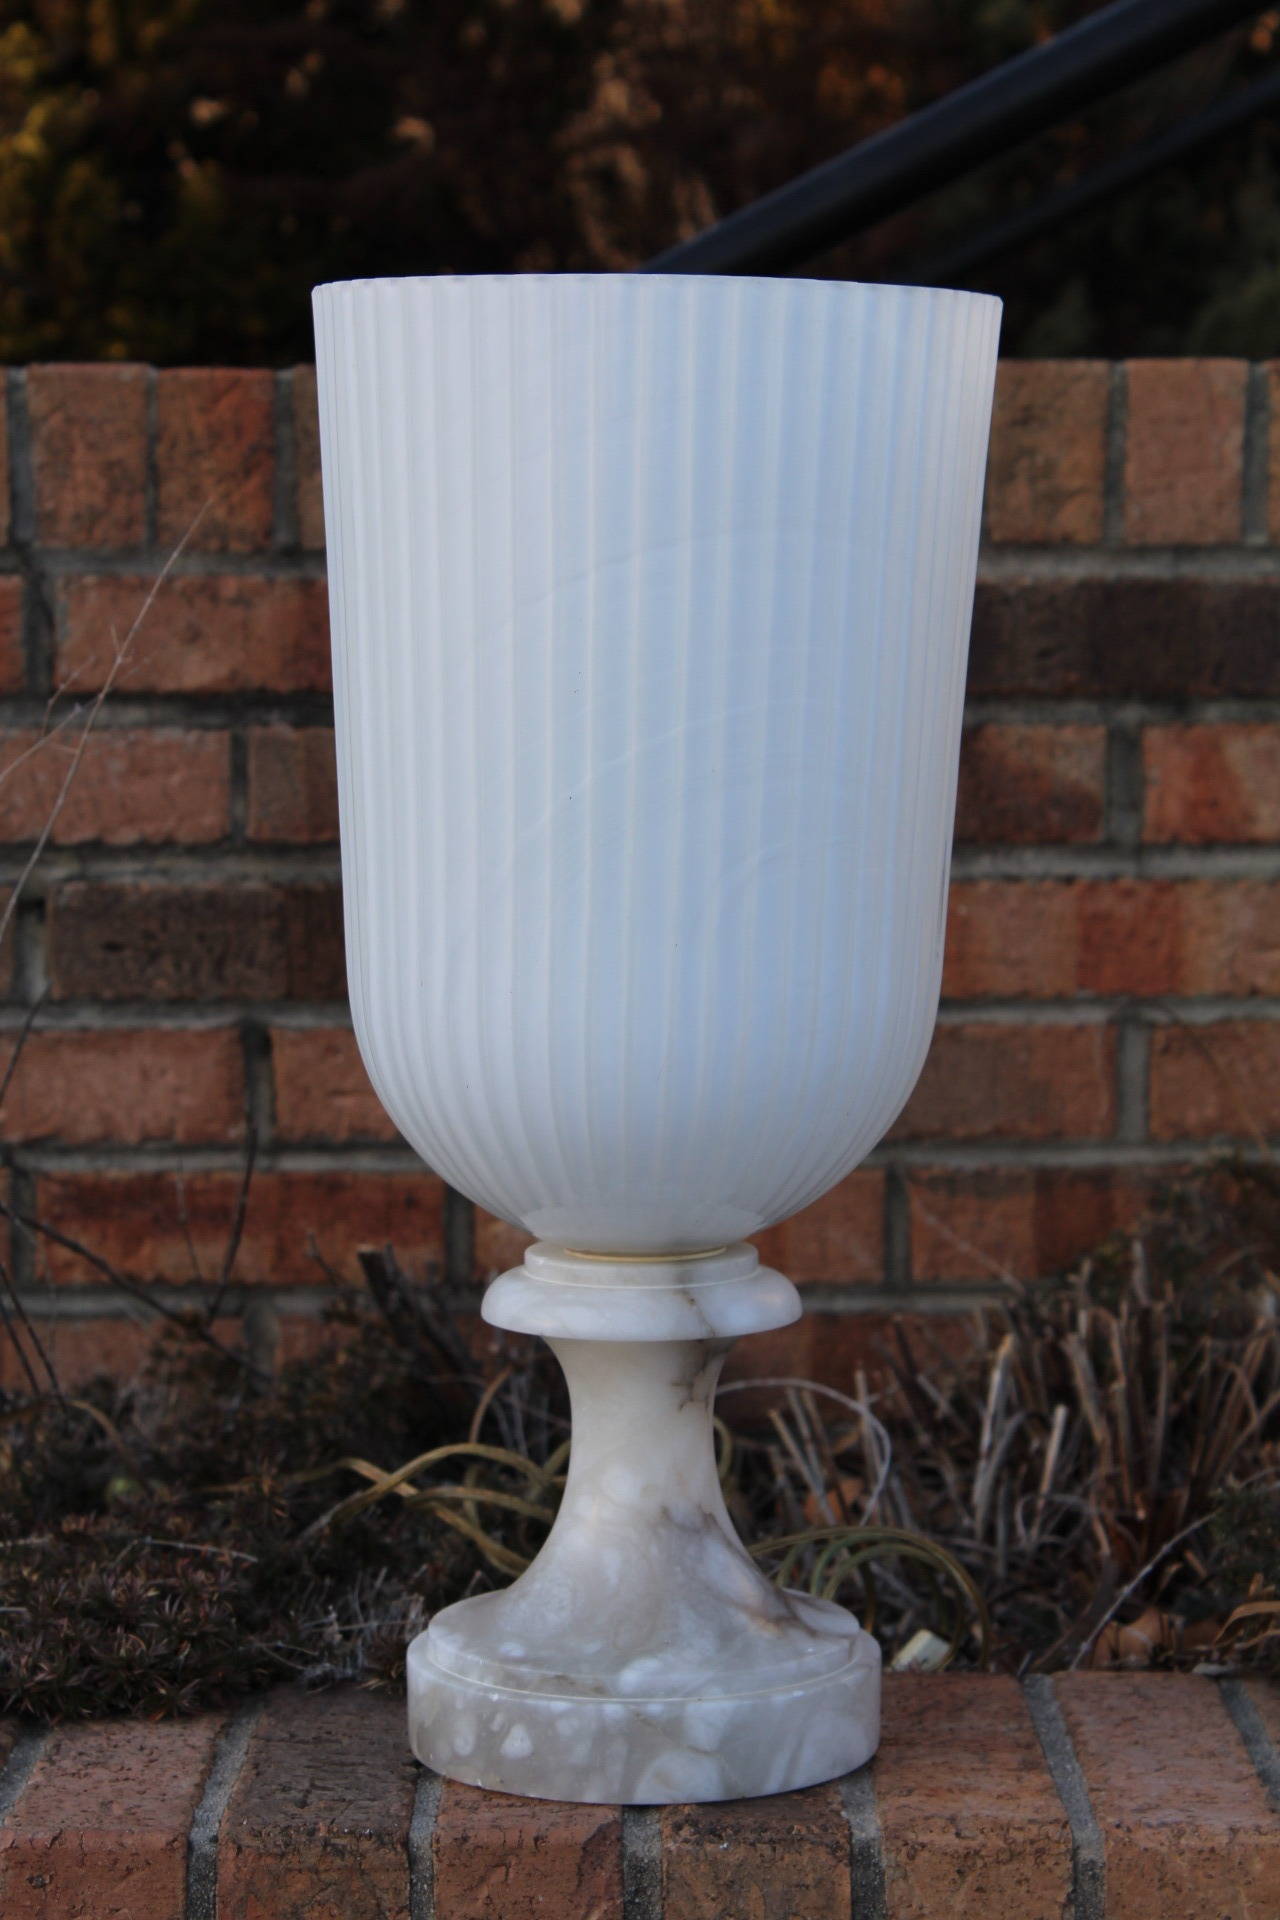 Wonderful marble and glass up light or table lamp by Sarreid, Italy, circa 1970. The shade is composed of two types of glass, milk glass on the interior which acts as a light diffuser, softening the light and clear glass on the outside, allowing the